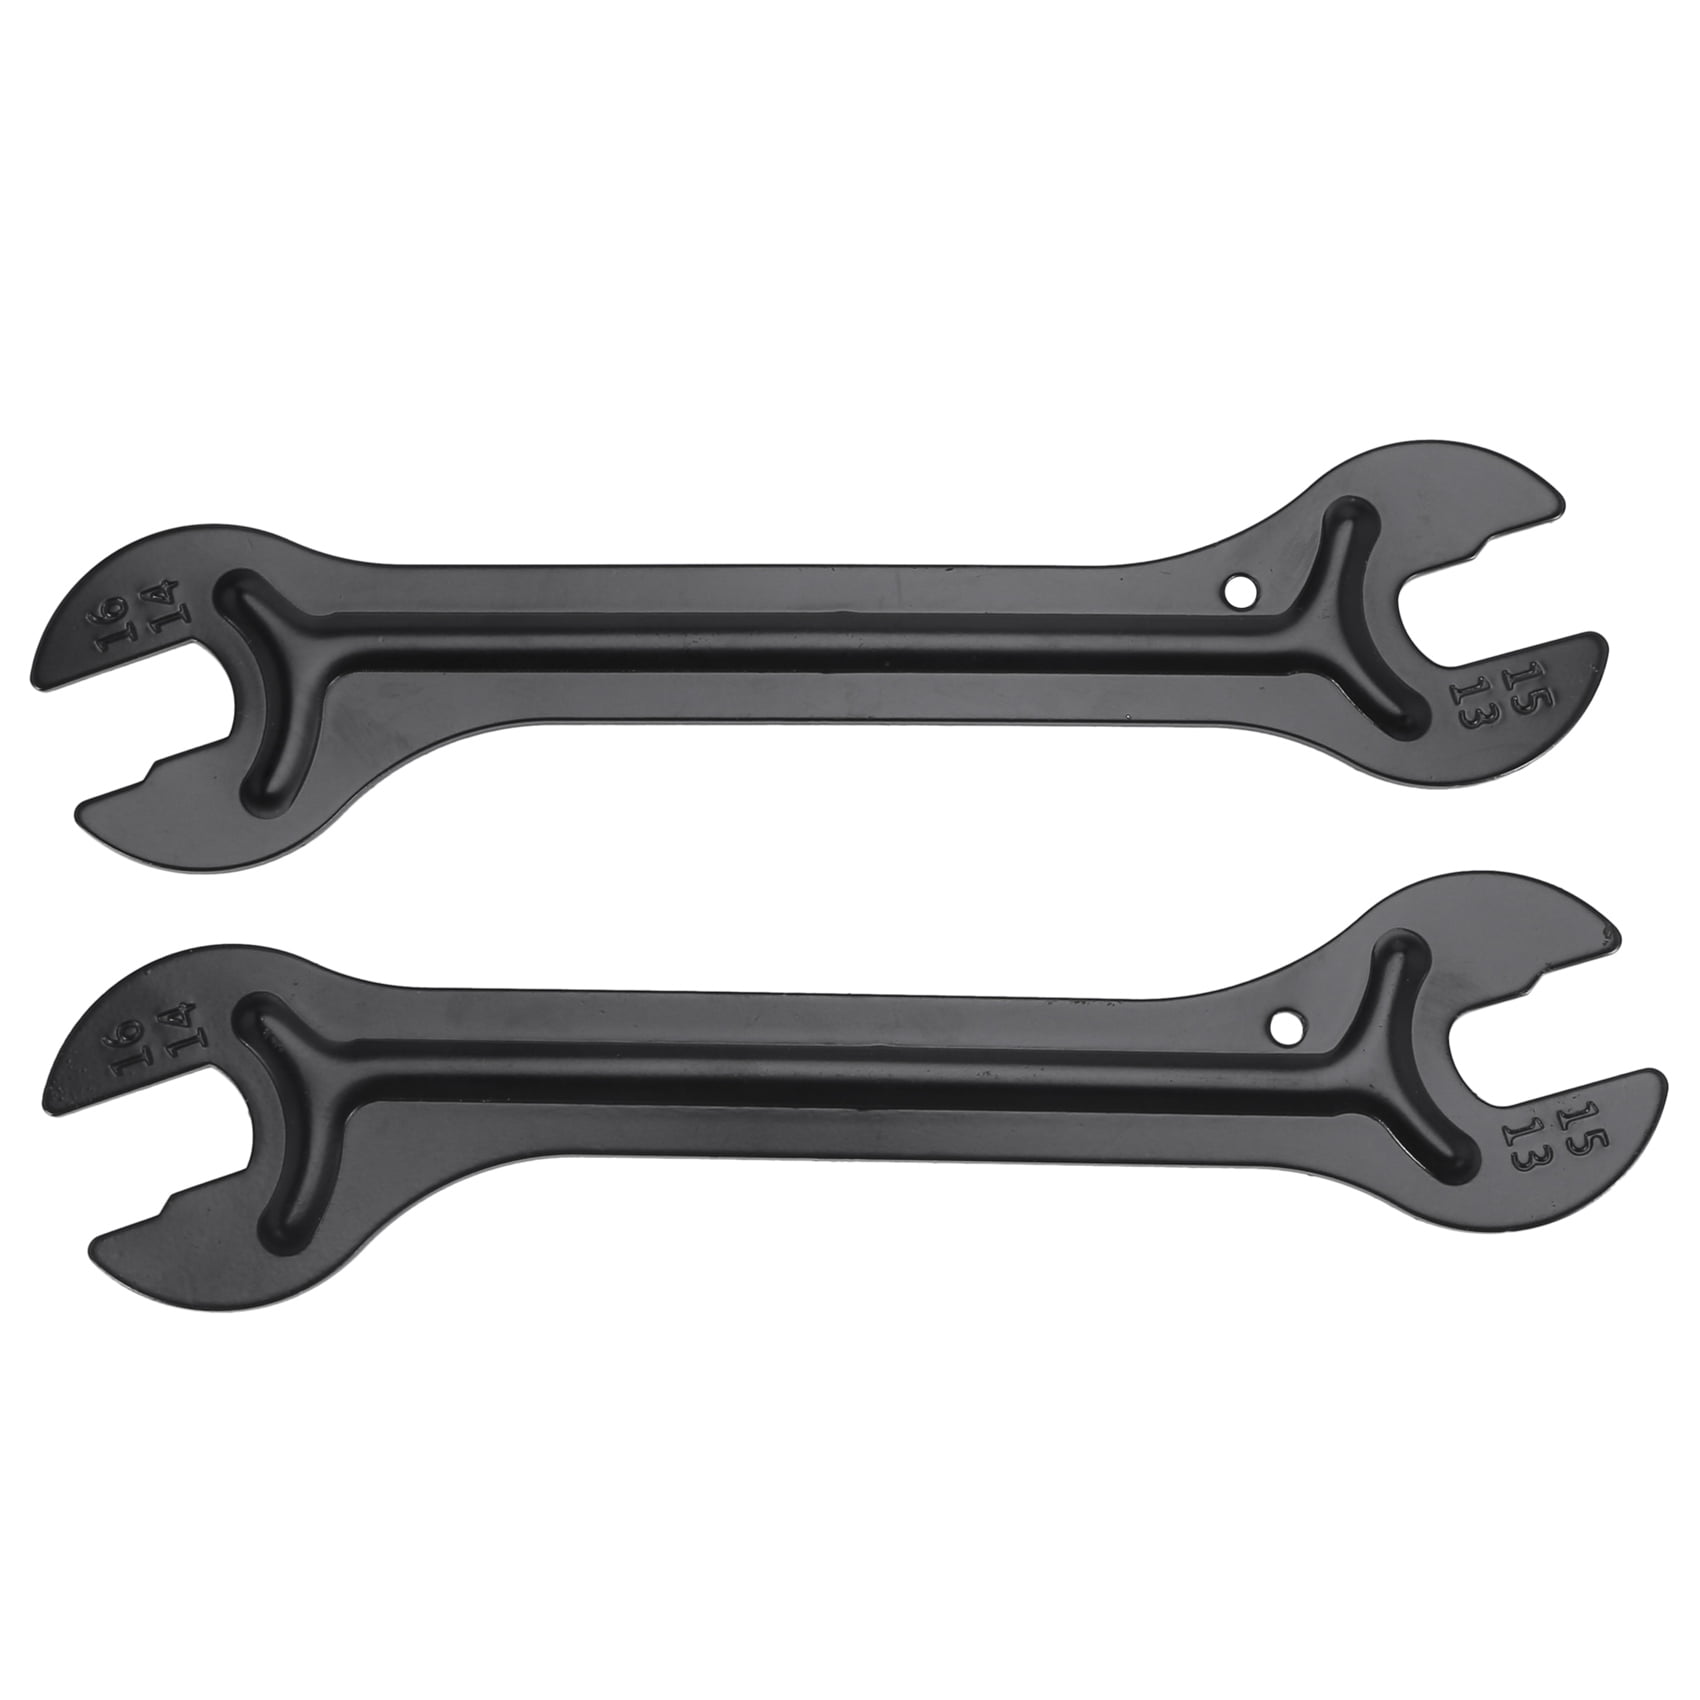 Sandalas 2 PCS Bicycle Cone Spanner Cone Wrench Spanner Hub Wrench Bicycle Repair Tools Bicycle Wheel Hub Axle Cone 